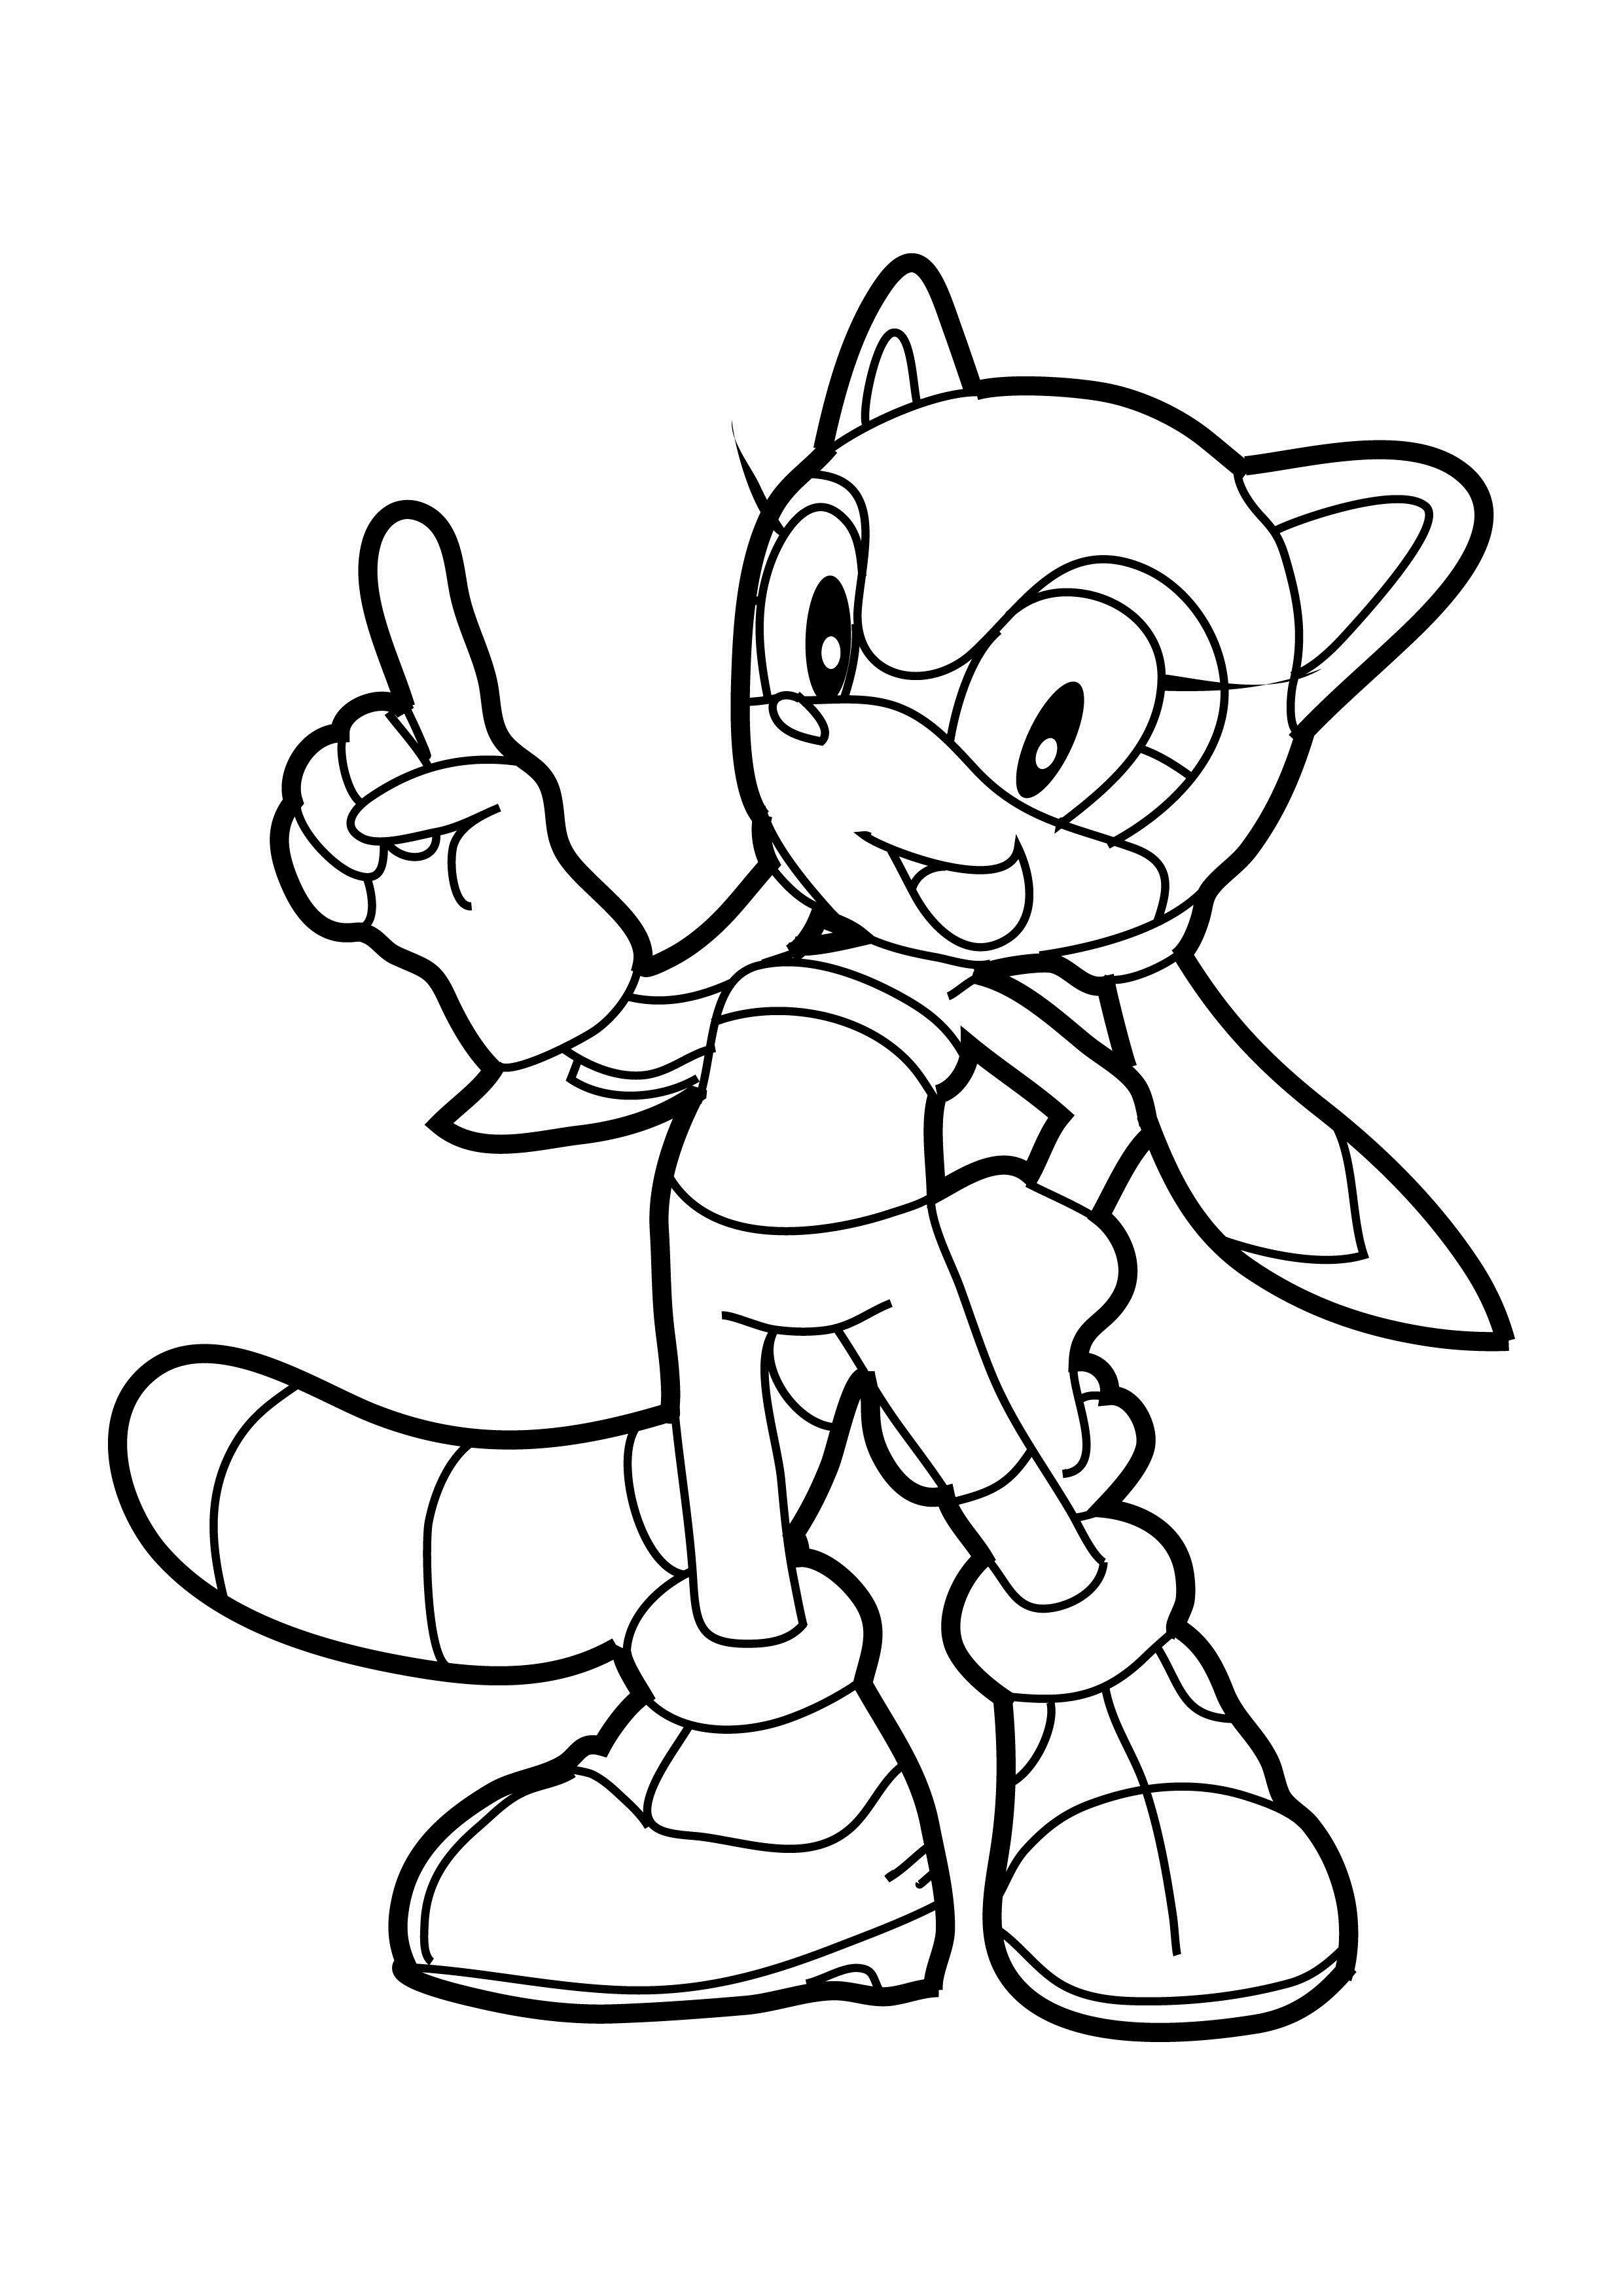 Sonic The Hedgehog Coloring Pages
 Free Printable Sonic The Hedgehog Coloring Pages For Kids